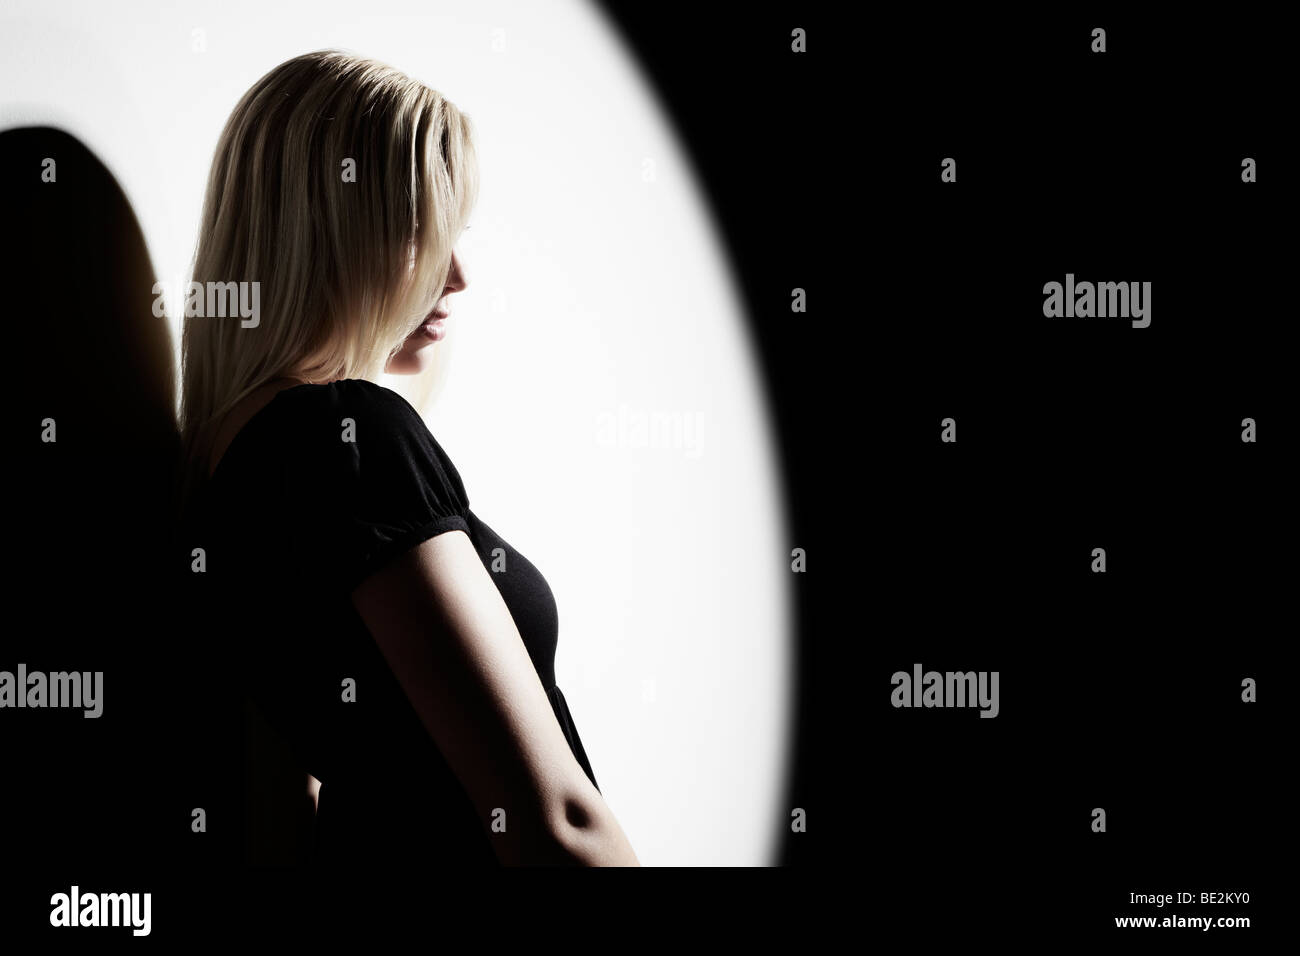 Portrait of a young woman wearing a black dress leaning against a wall Stock Photo